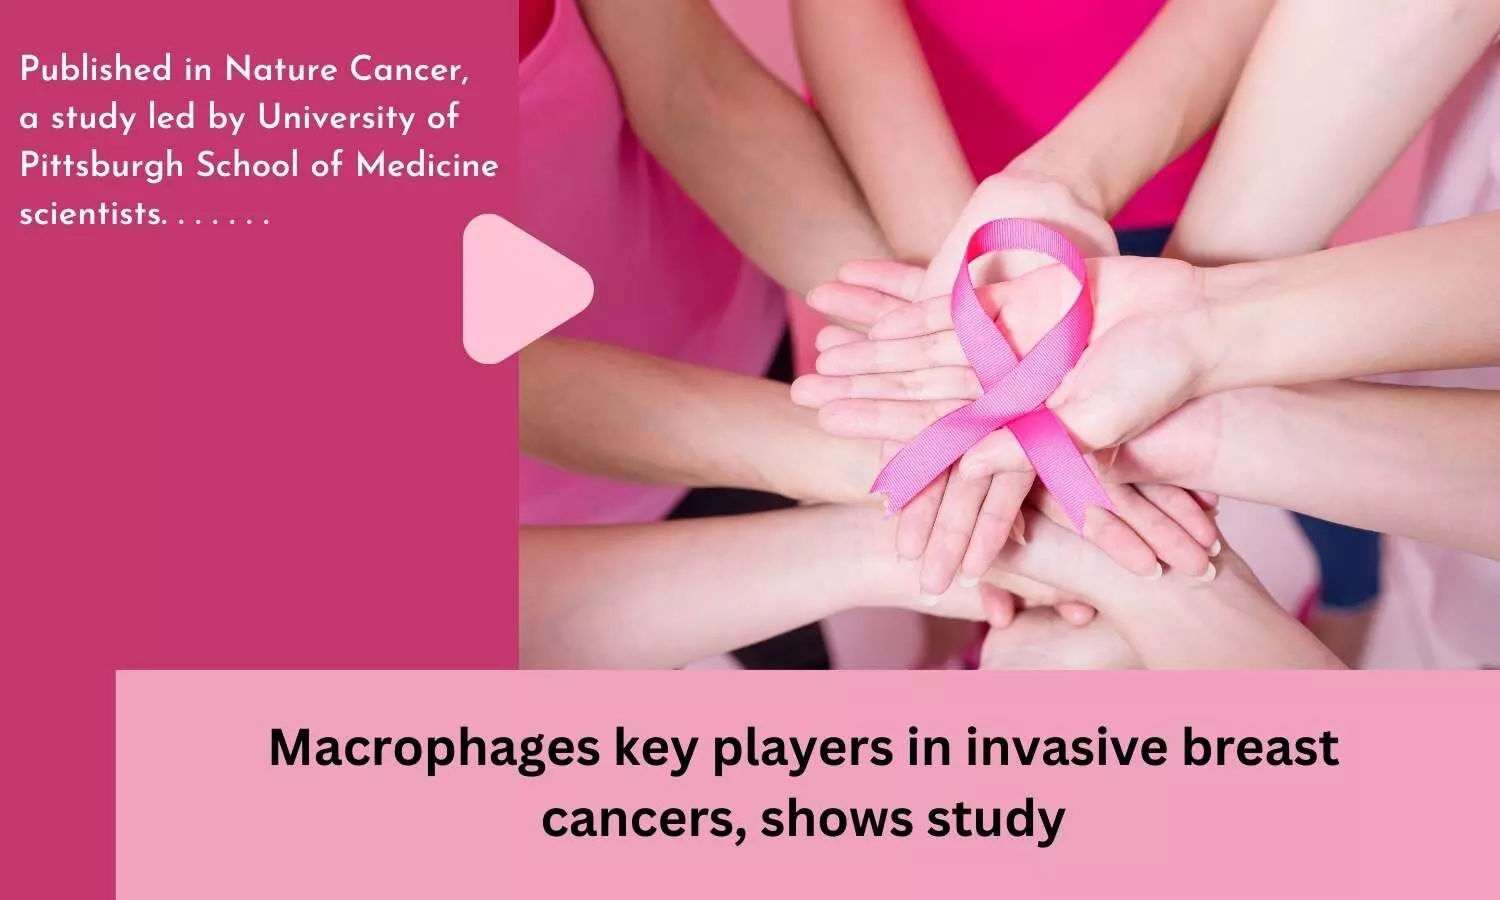 Macrophages key players in invasive breast cancers, shows study